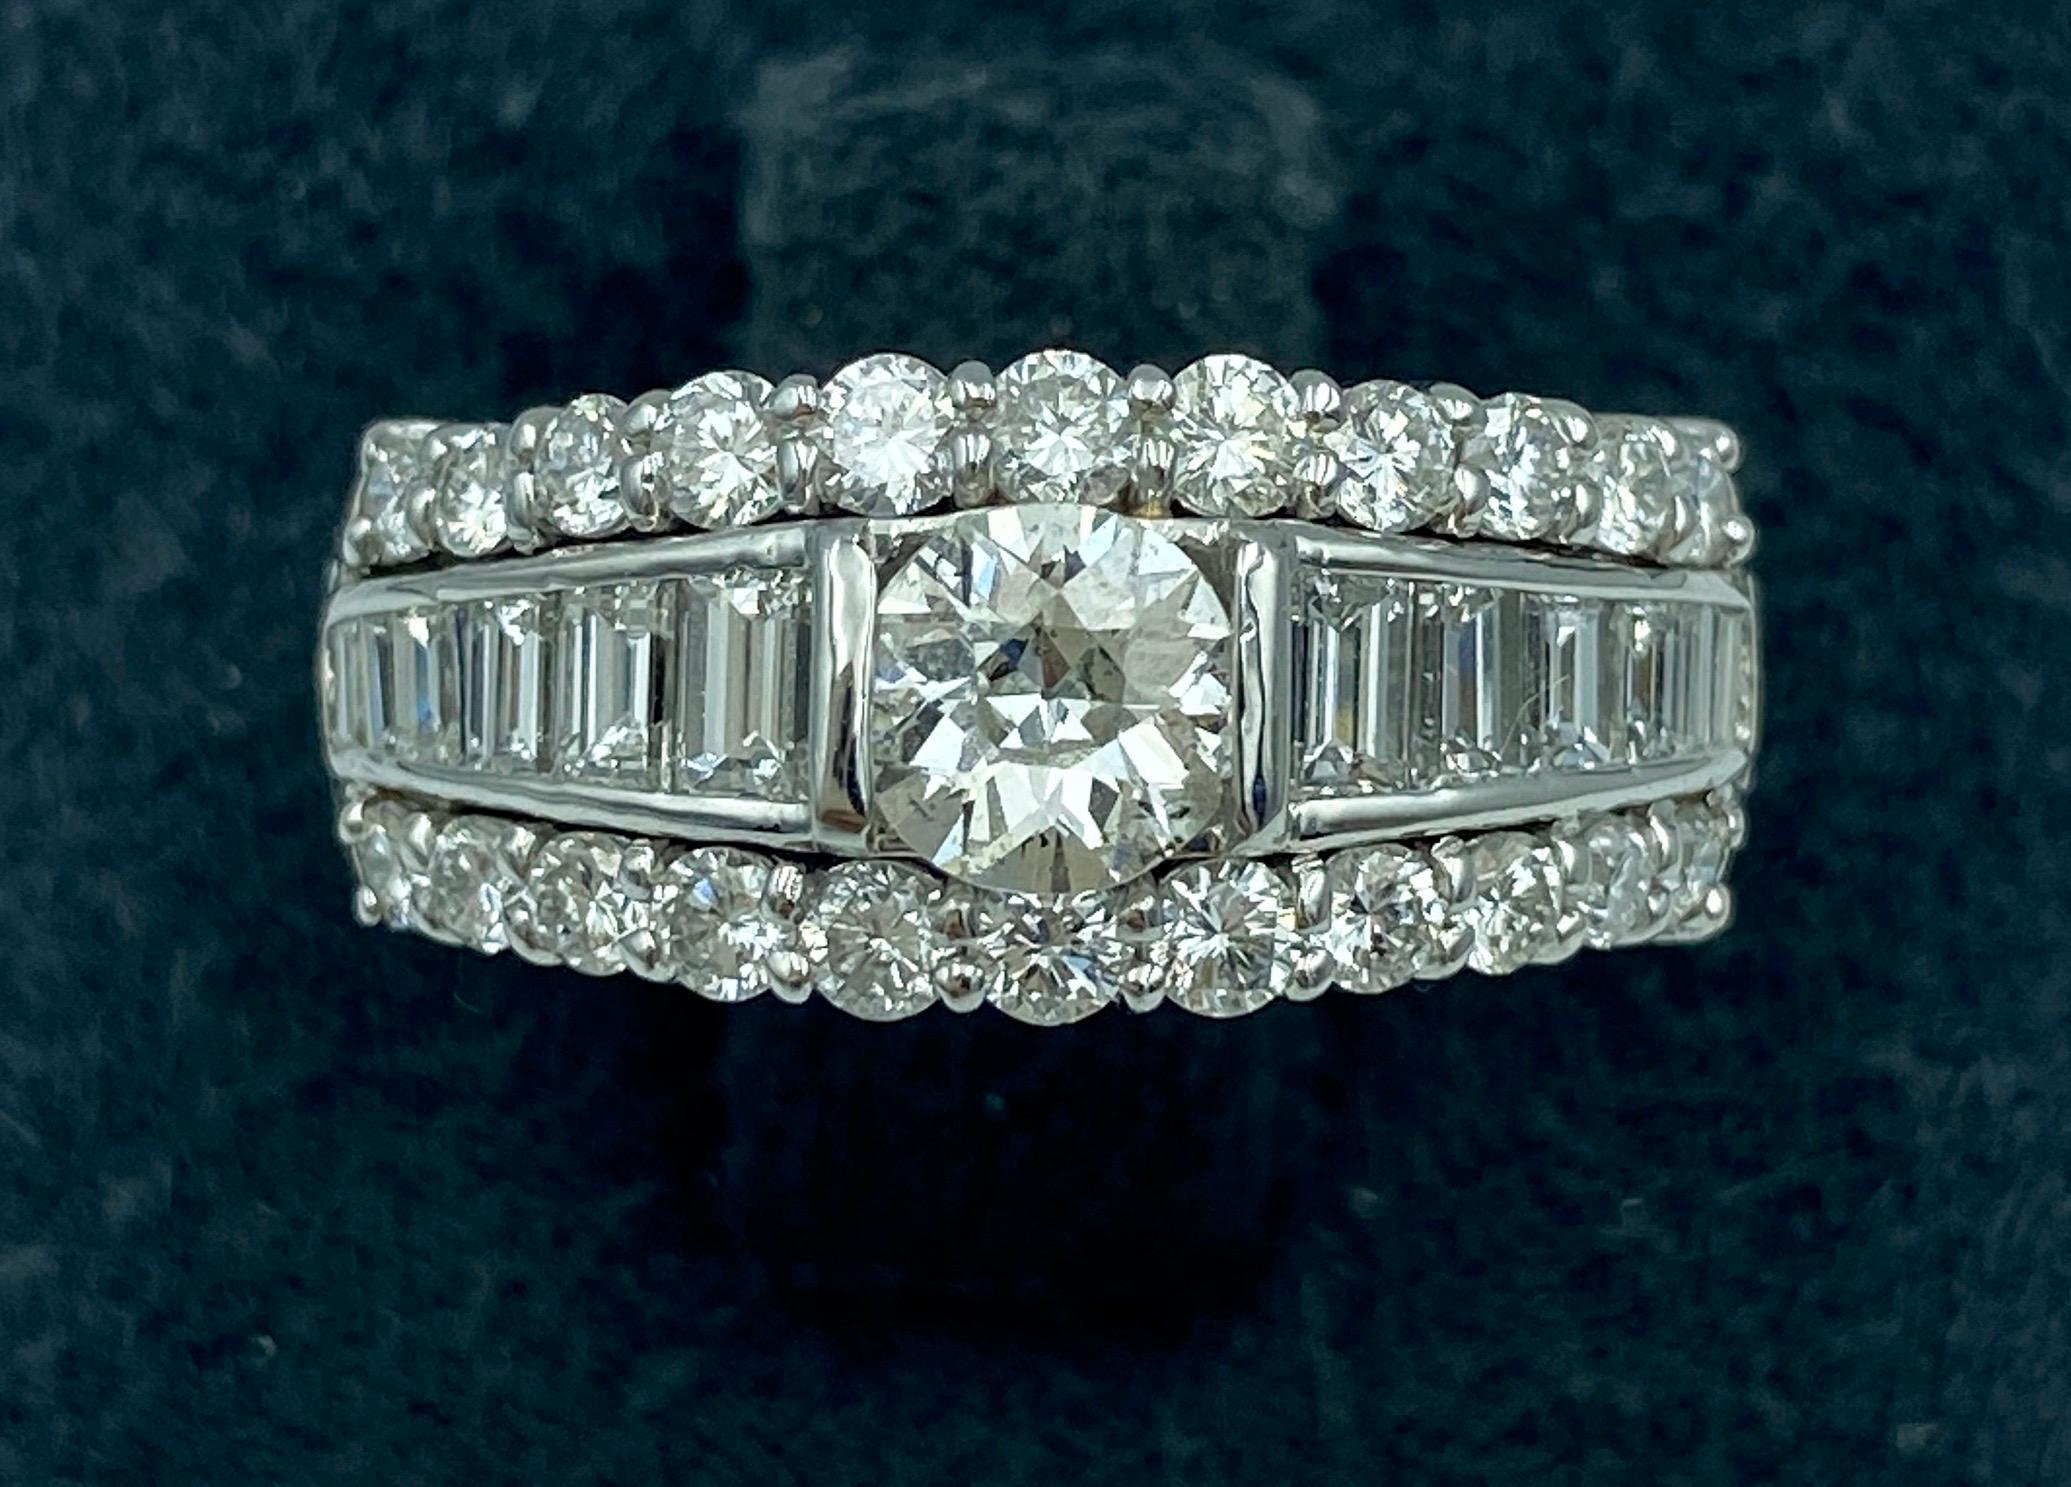 This beautifully made European 1970s platinum and diamond engagement ring has a centre stone of 0.54 carats and totals 1.33 carats in diamonds. The diamonds are VVS clarity and F-G colour. The quality of the diamonds together with the superior